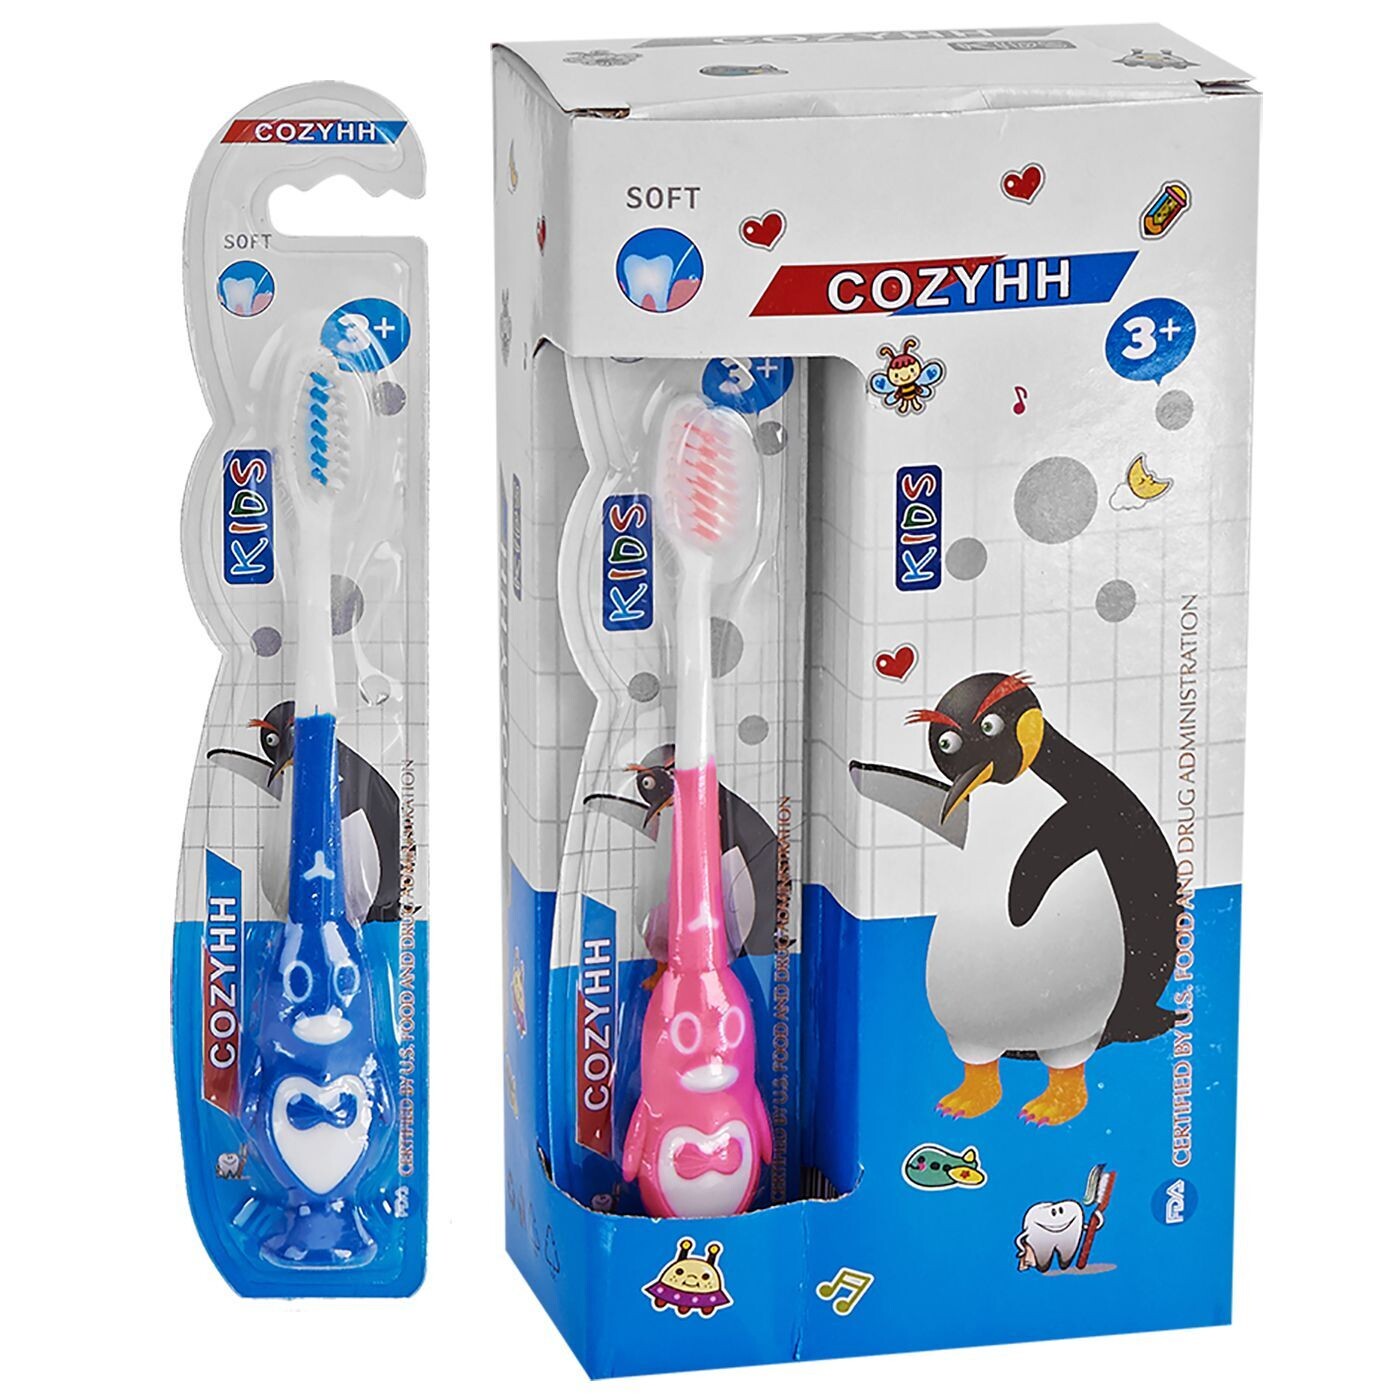 Toothbrush for kids 3+